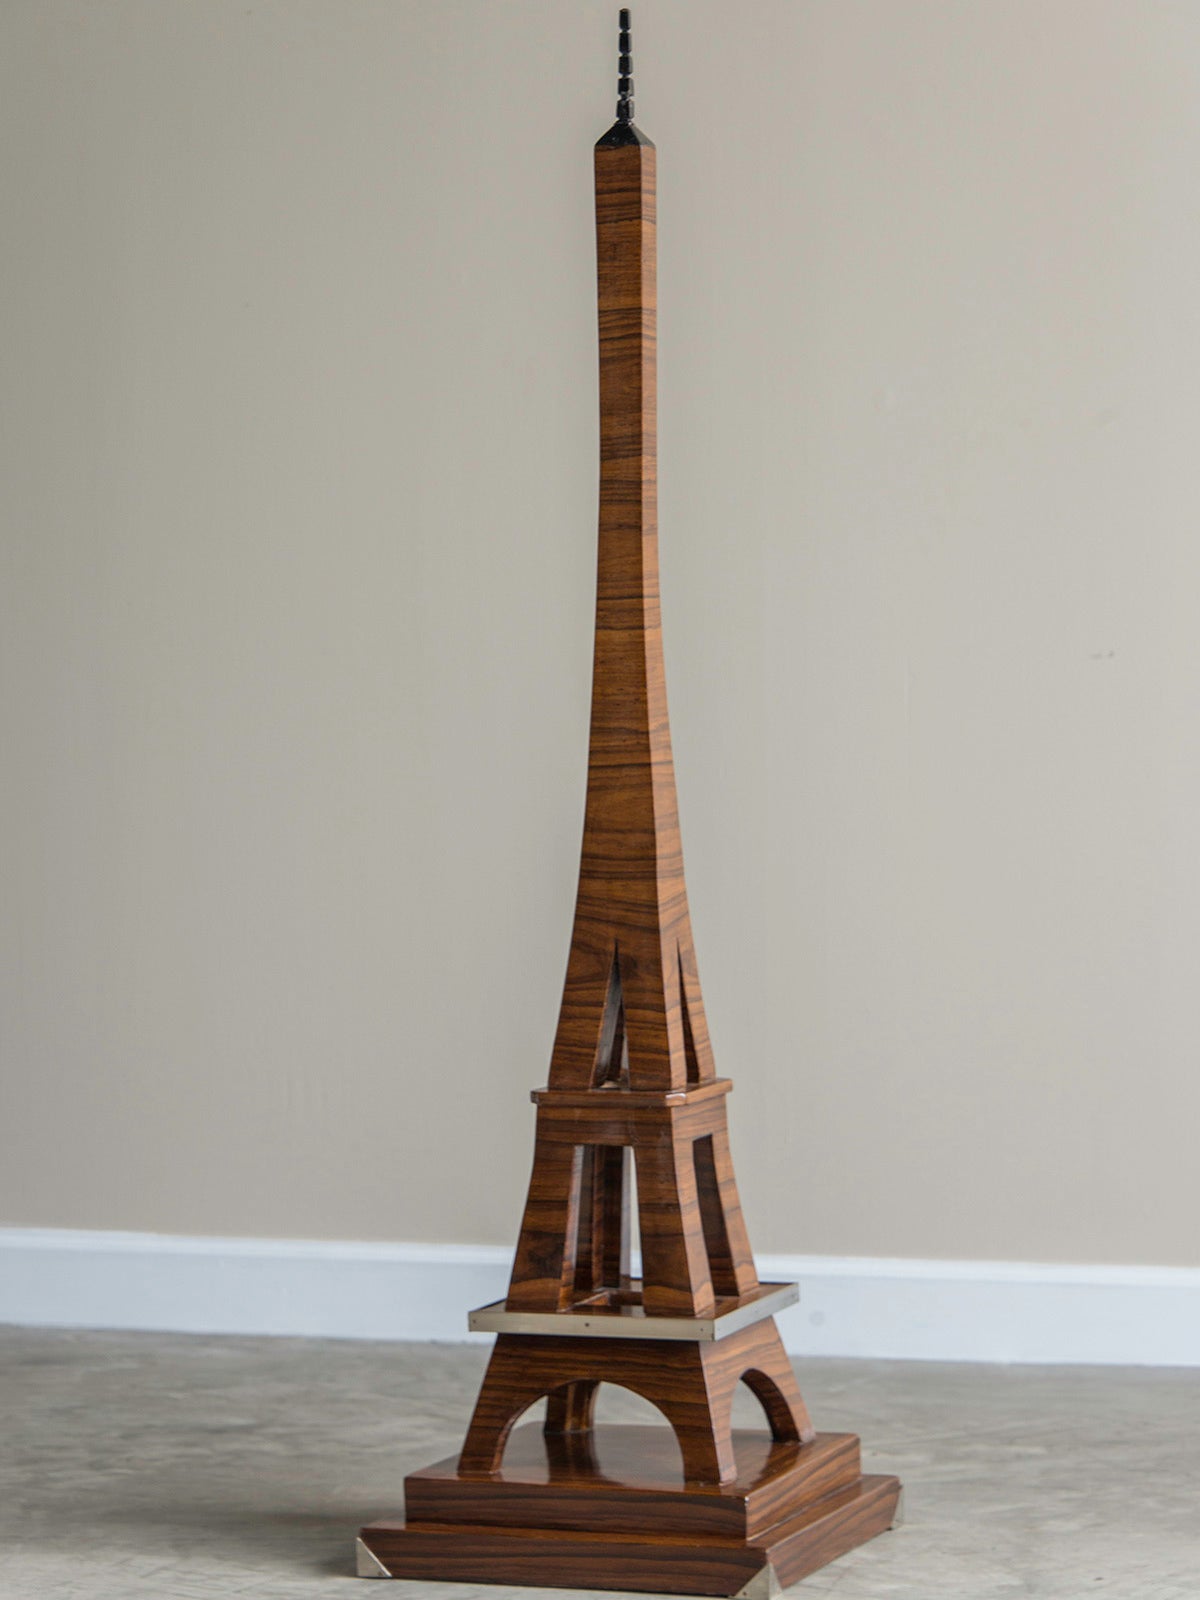 Receive our new selections direct from 1stdibs by email each week. Please click “Follow Dealer” button below and see them first!

The sleek lines of Art Deco are perfectly realized in this vintage model of the Eiffel Tower circa 1930 that includes